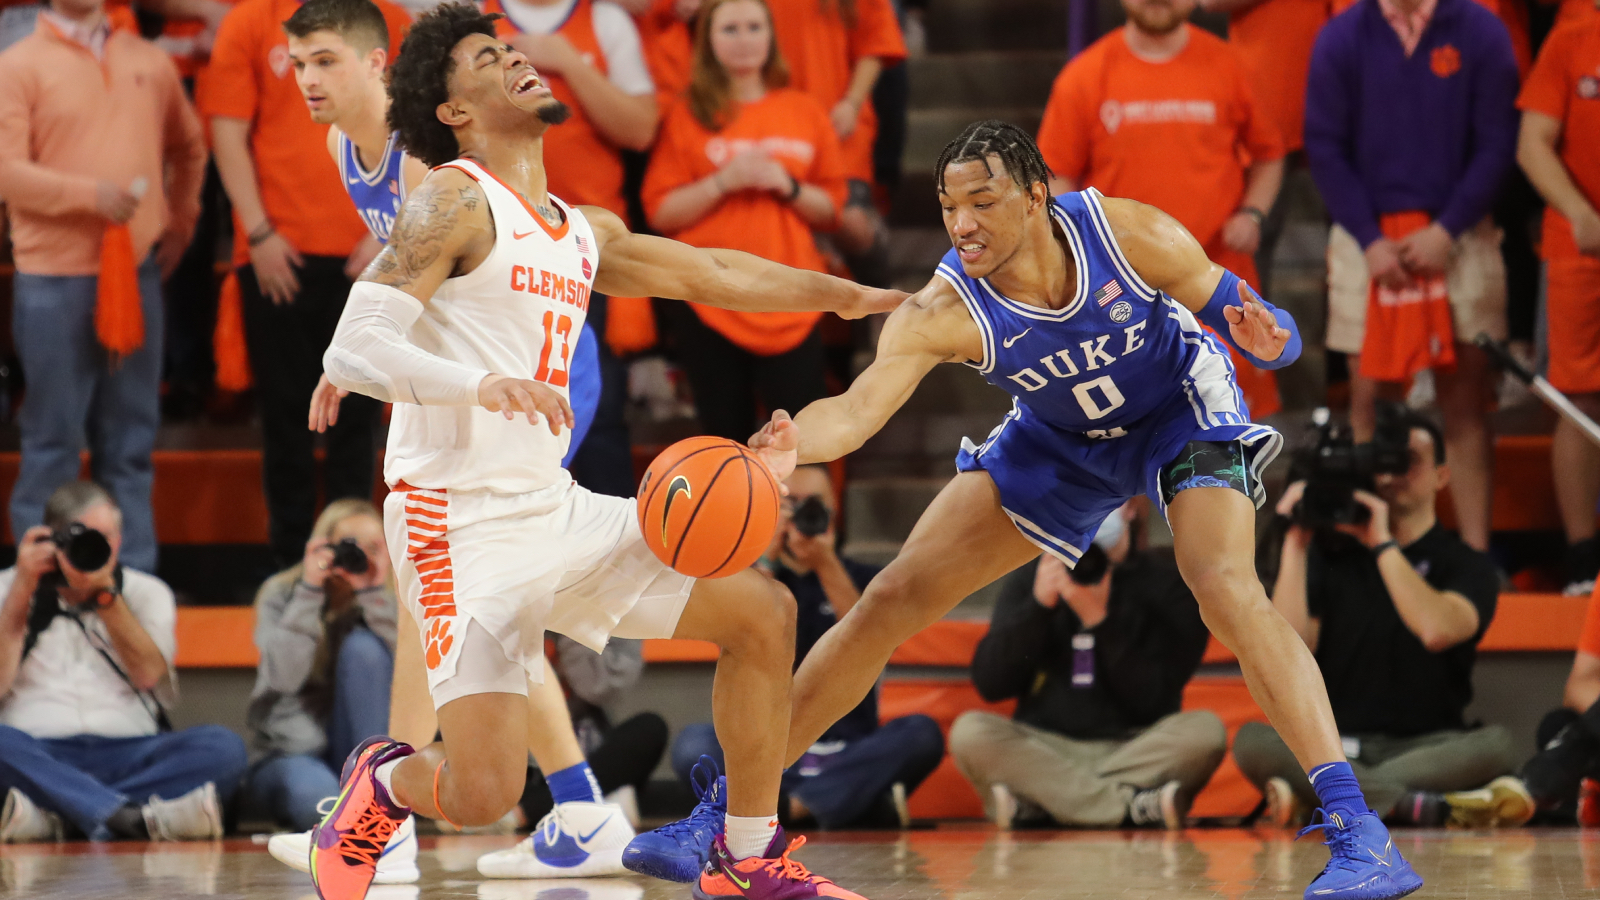 Clemson‘s David Collins Suspended One Game After Dangerous Foul Vs. Duke